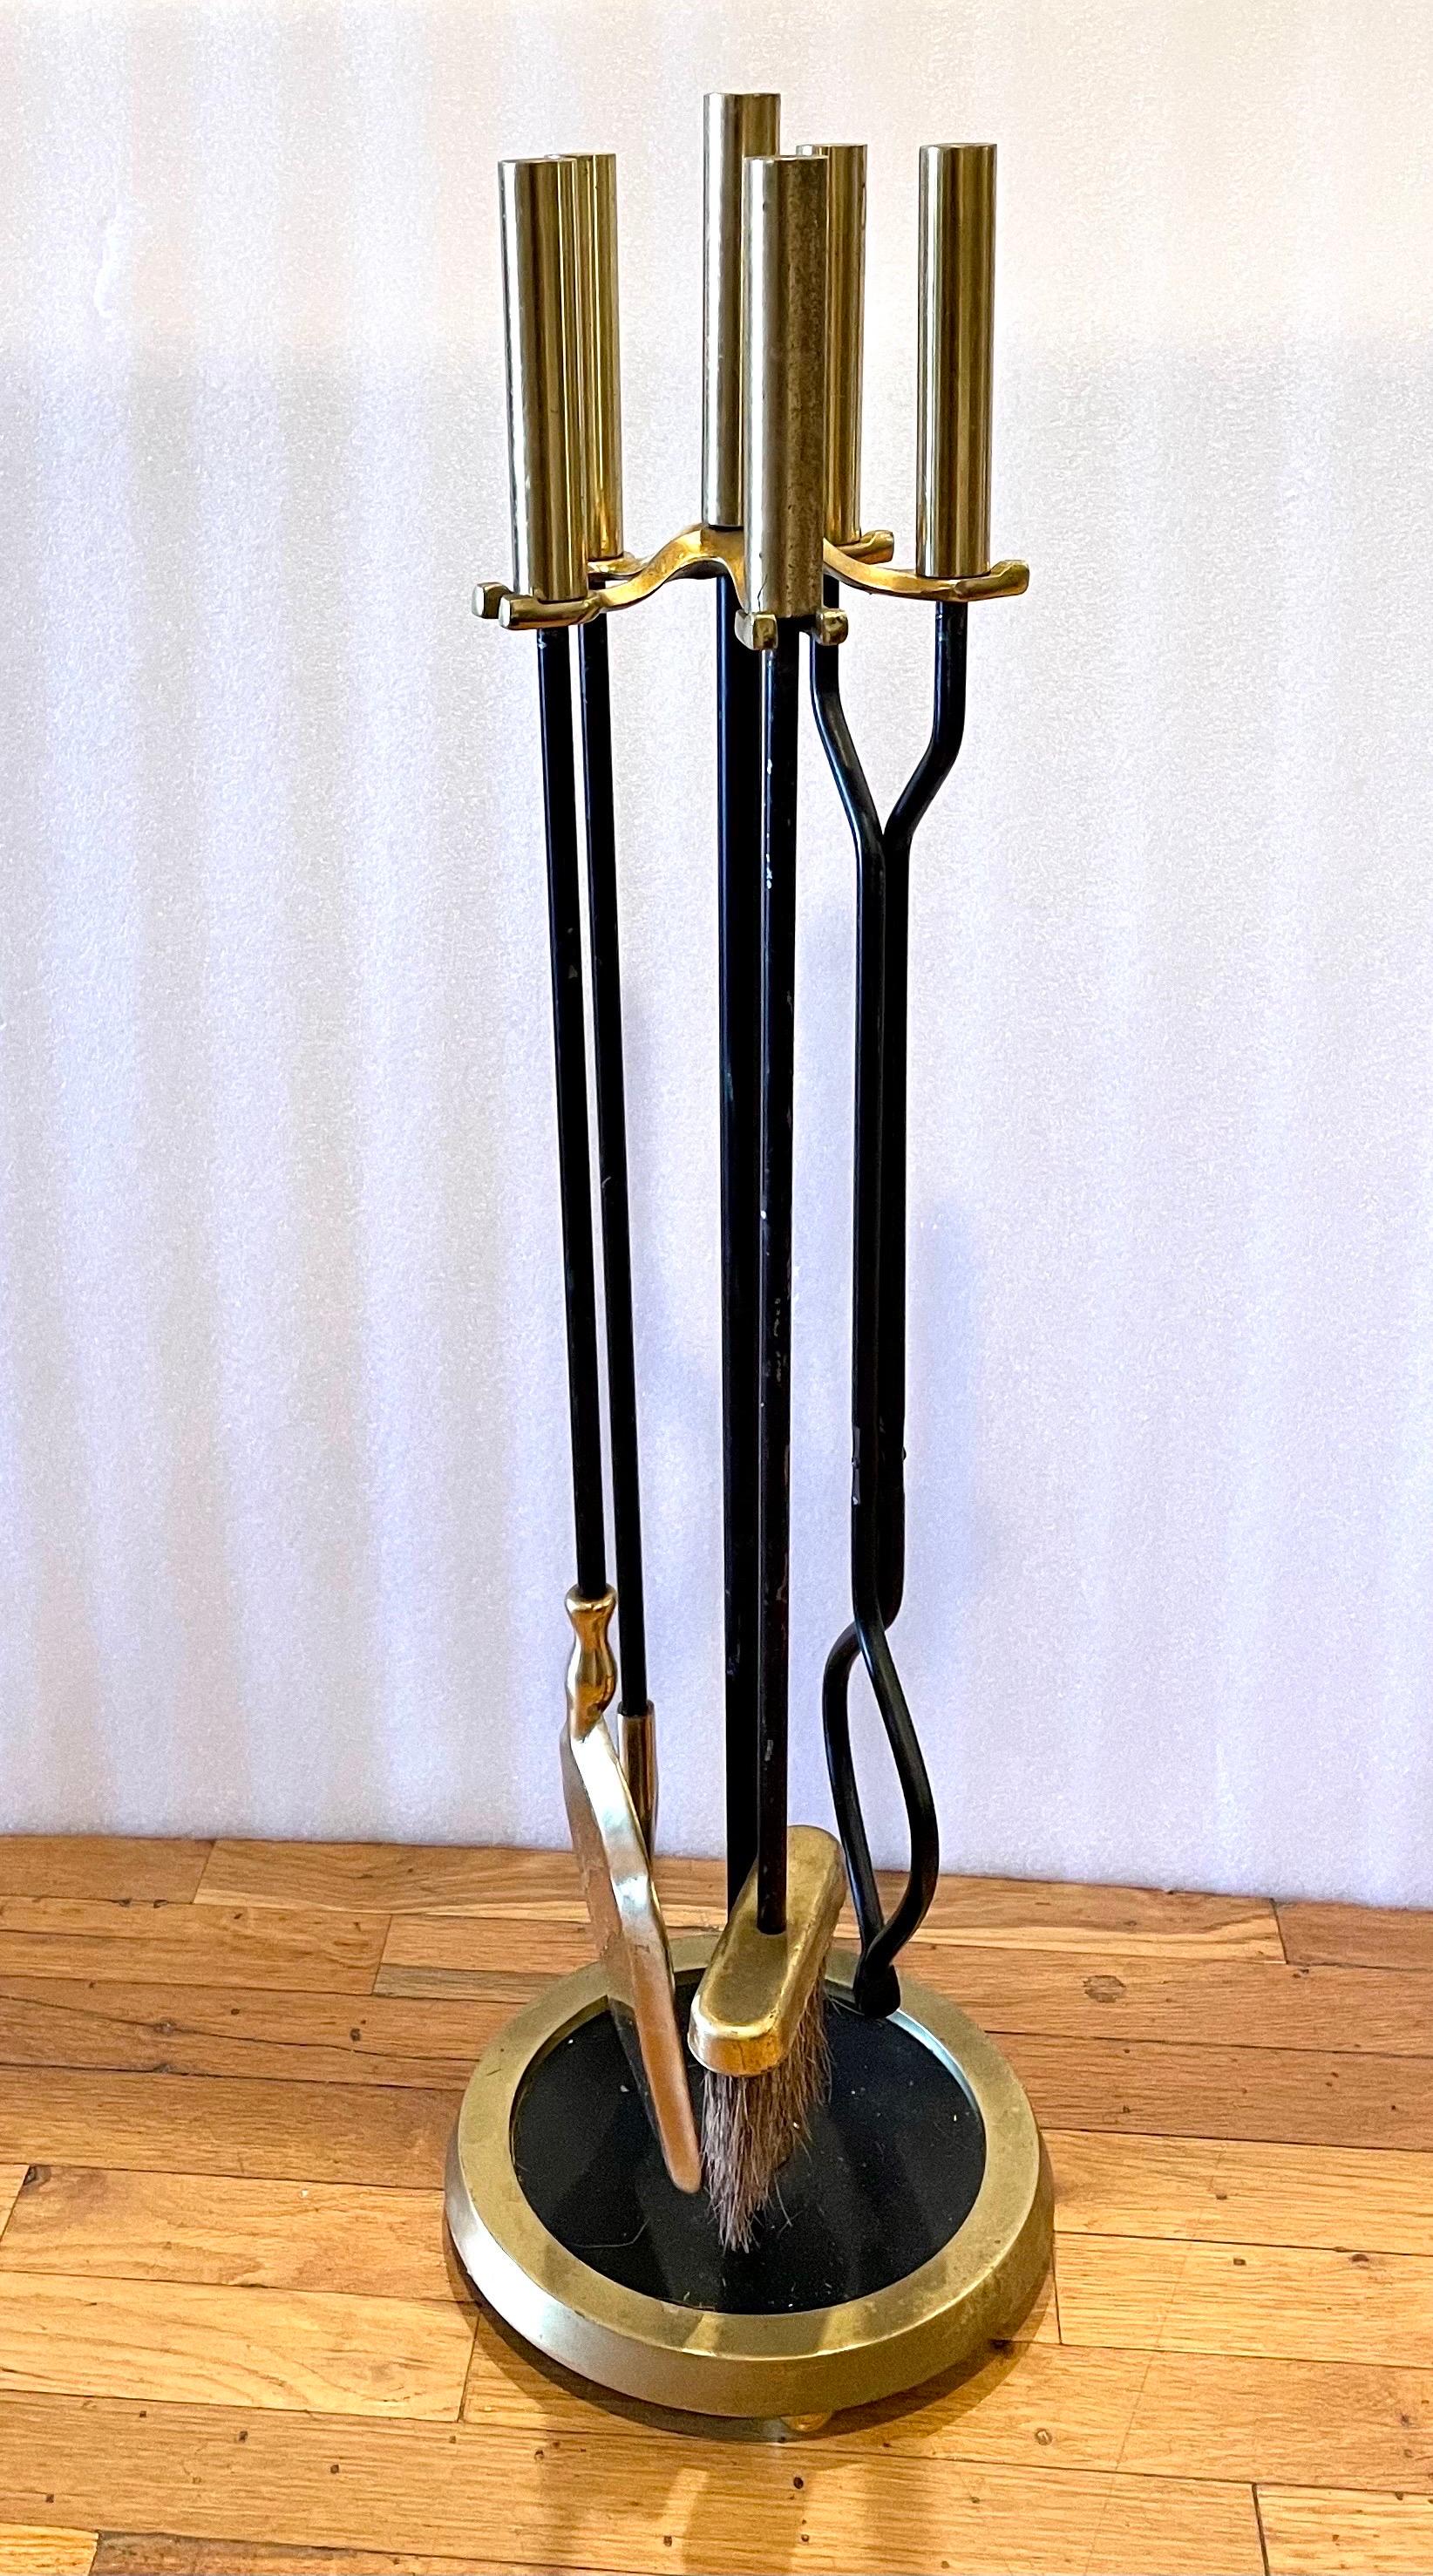 Elegant brass and iron fireplace tool set with beautiful patinated brushed brass handles, circa 1970s. Amazing quality; very heavy with nice detail on the handles. Set includes a shovel, brush, poker and log holder.